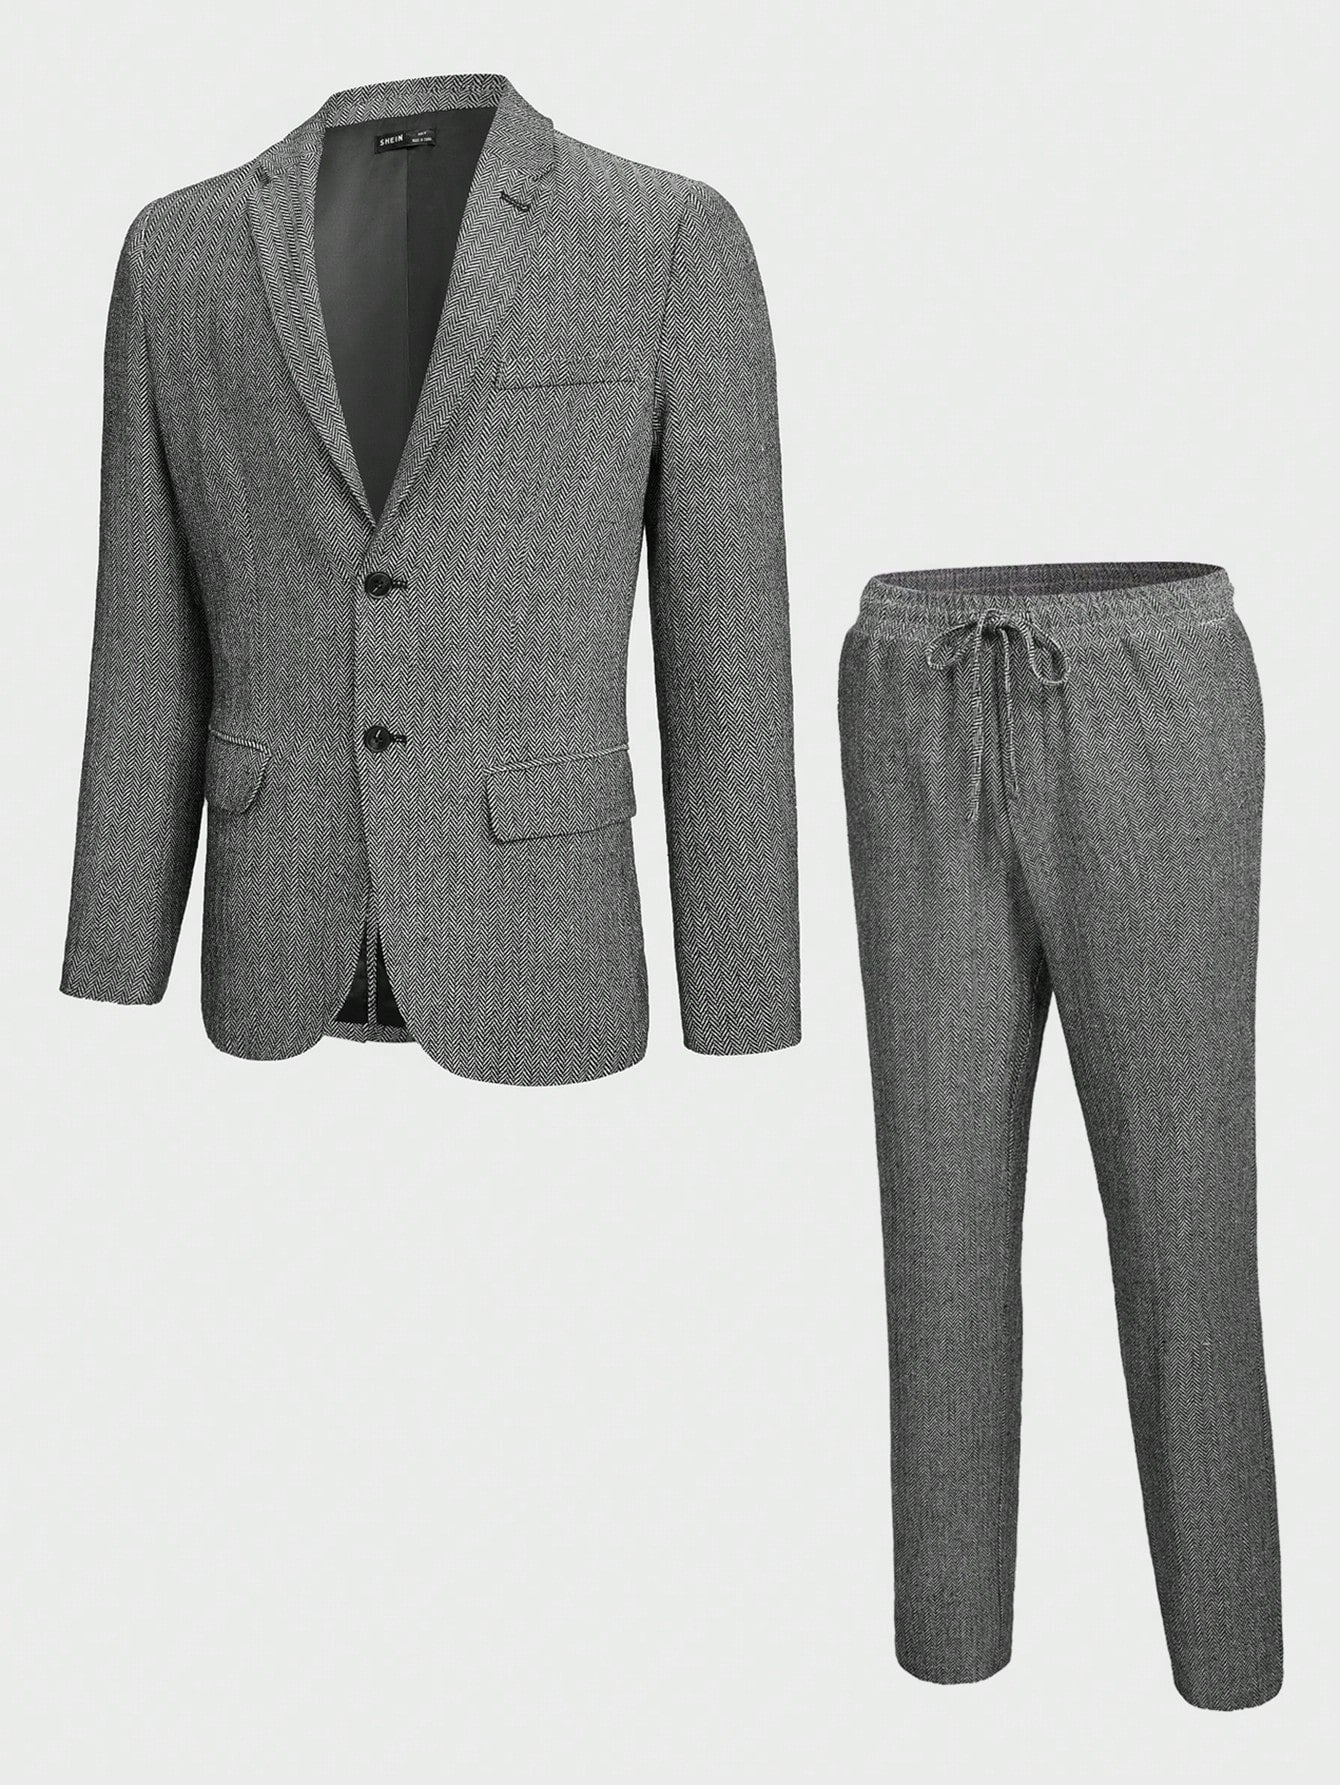 Manfinity Mode Men's Woven Suit Jacket And Trousers Set